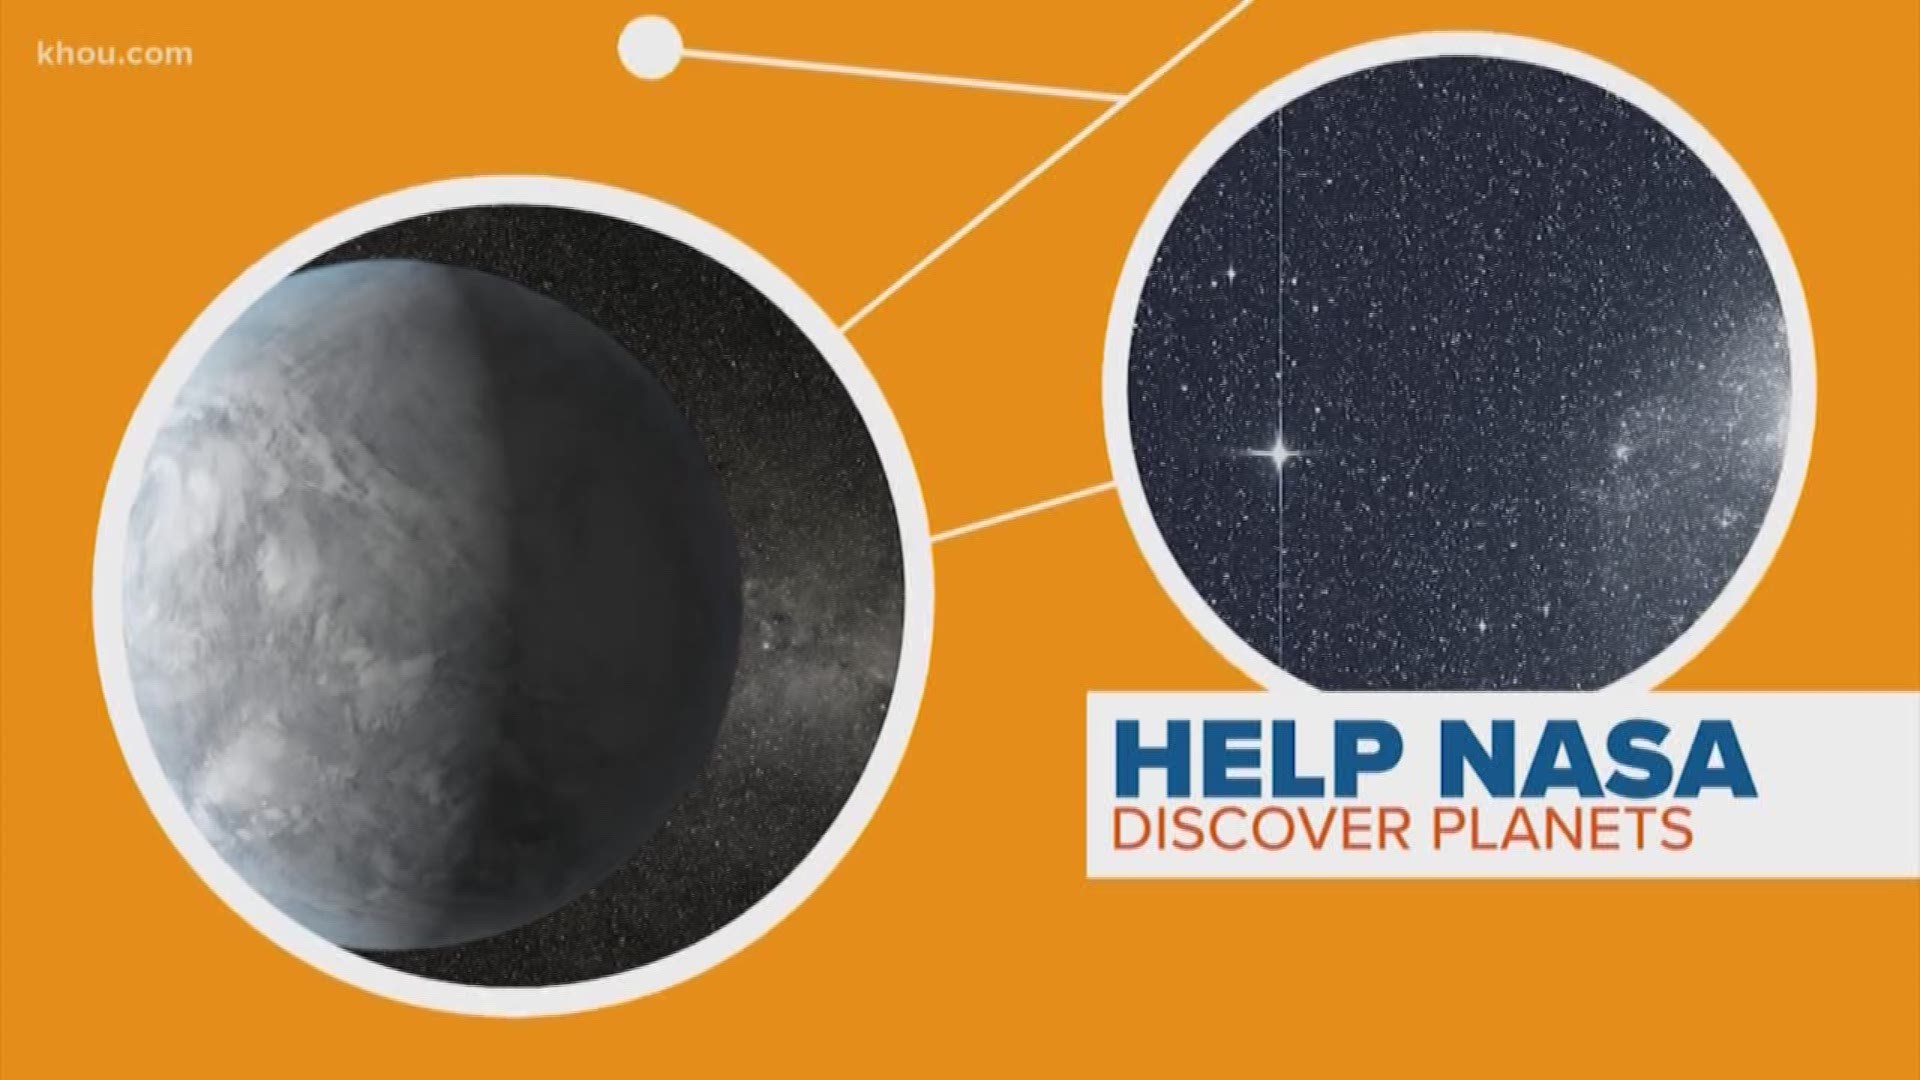 NASA has the offer of a lifetime. The agency wants you to help out with some space exploration. Marcelino Benito connects the dots.